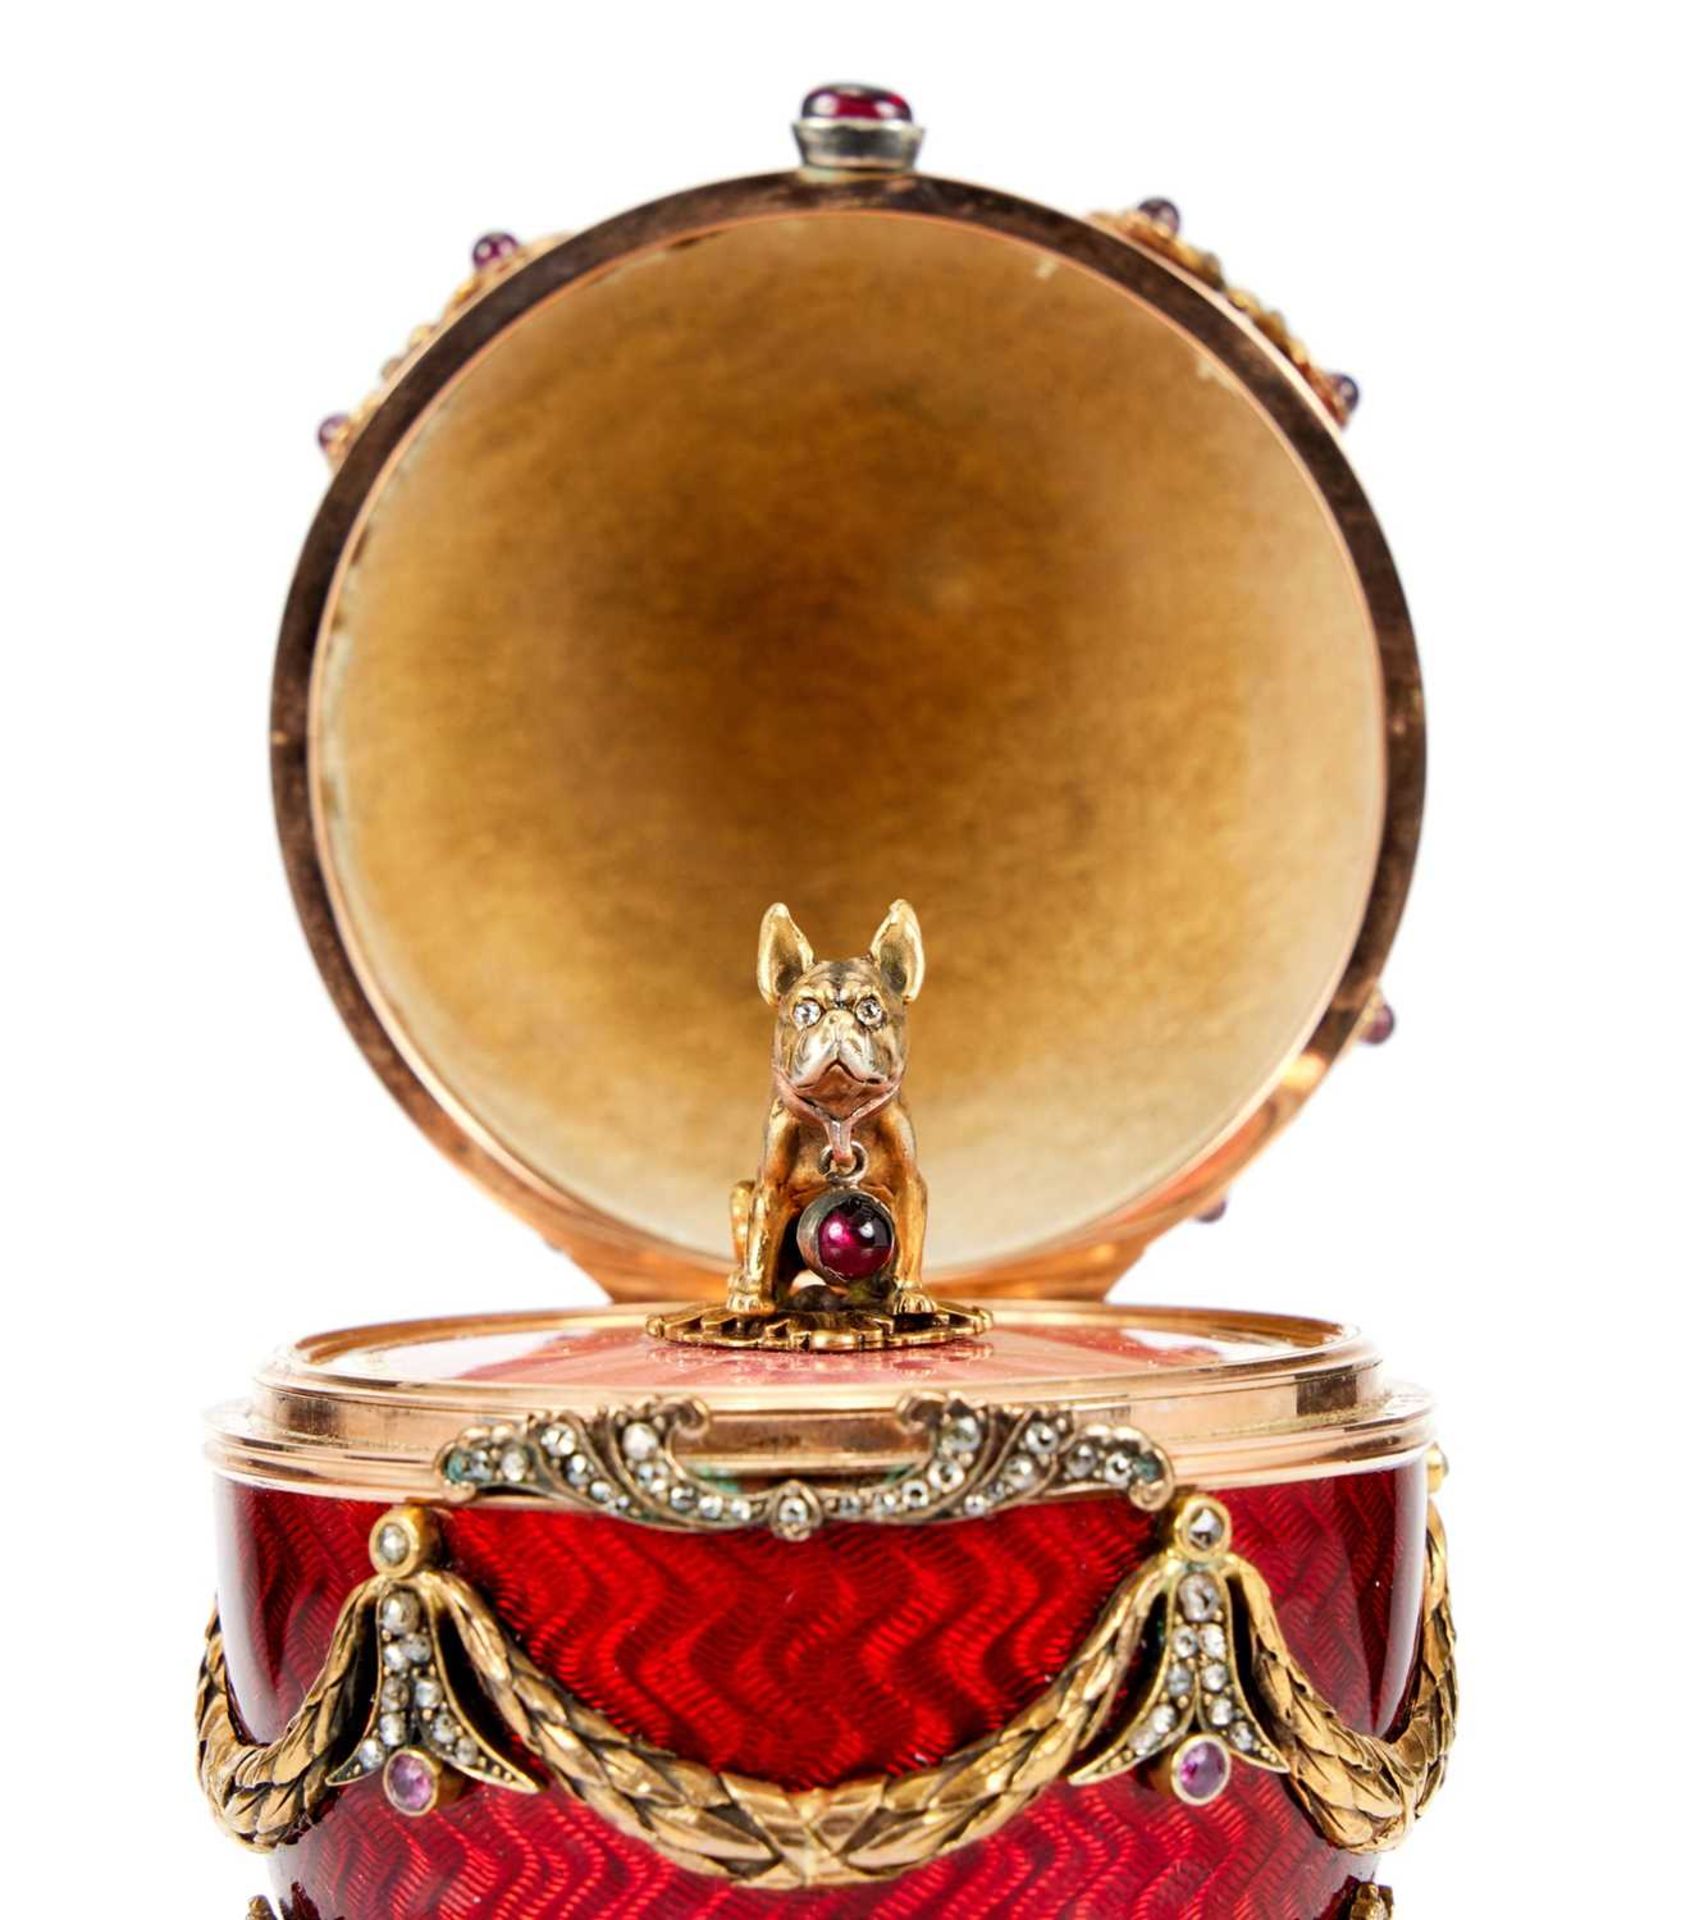 A FABERGE STYLE DIAMOND ENCRUSTED, GUILLOCHE ENAMEL, SILVER GILT AND 14CT GOLD MOUNTED SURPRISE EGG - Image 3 of 6